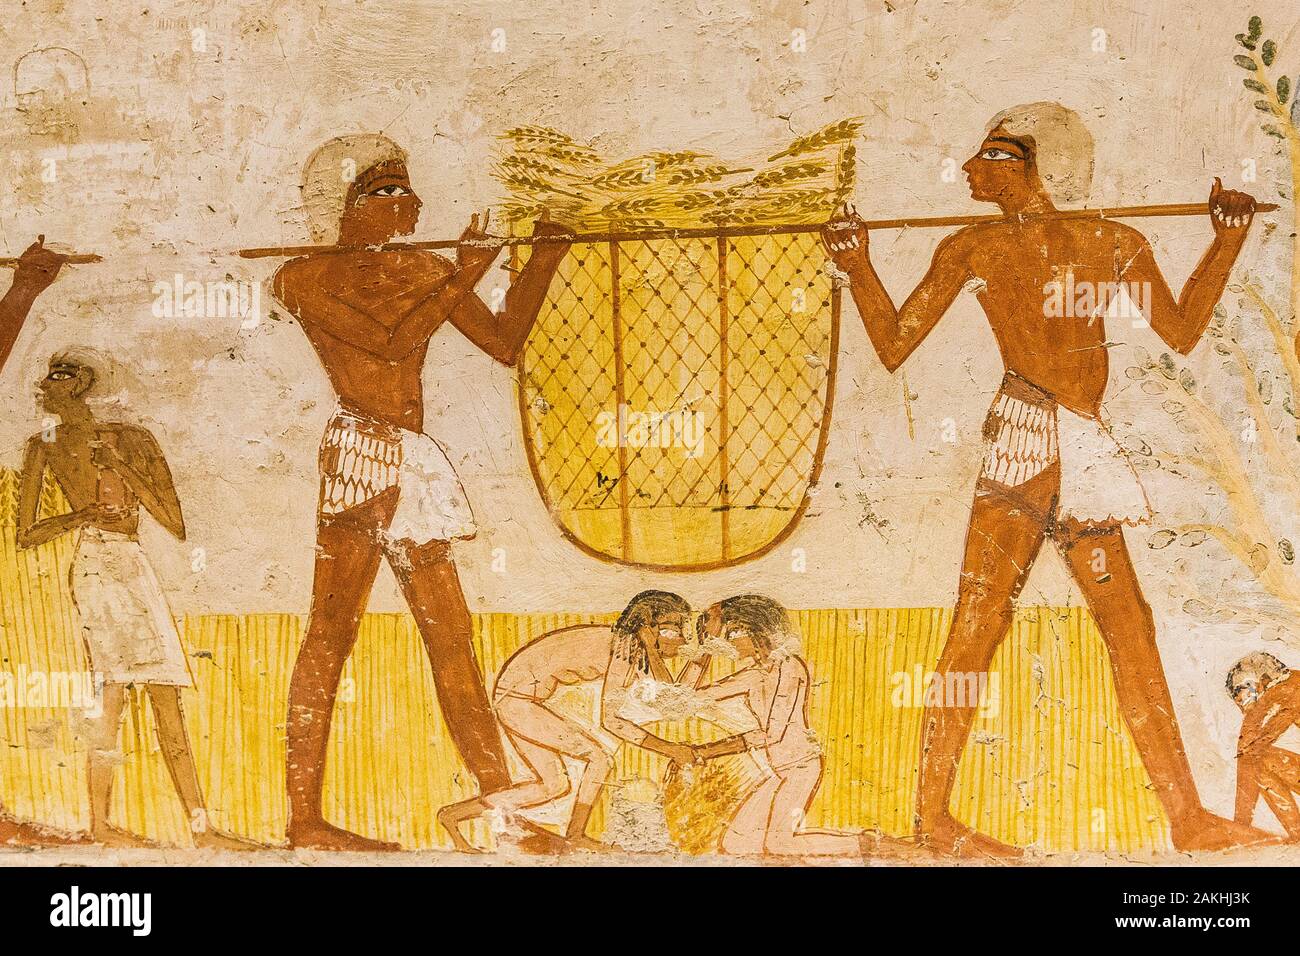 Luxor in Egypt, tomb of Menna. This classical agricultural scene is made more lively by several funny details, like a fight between 2 young girls. Stock Photo